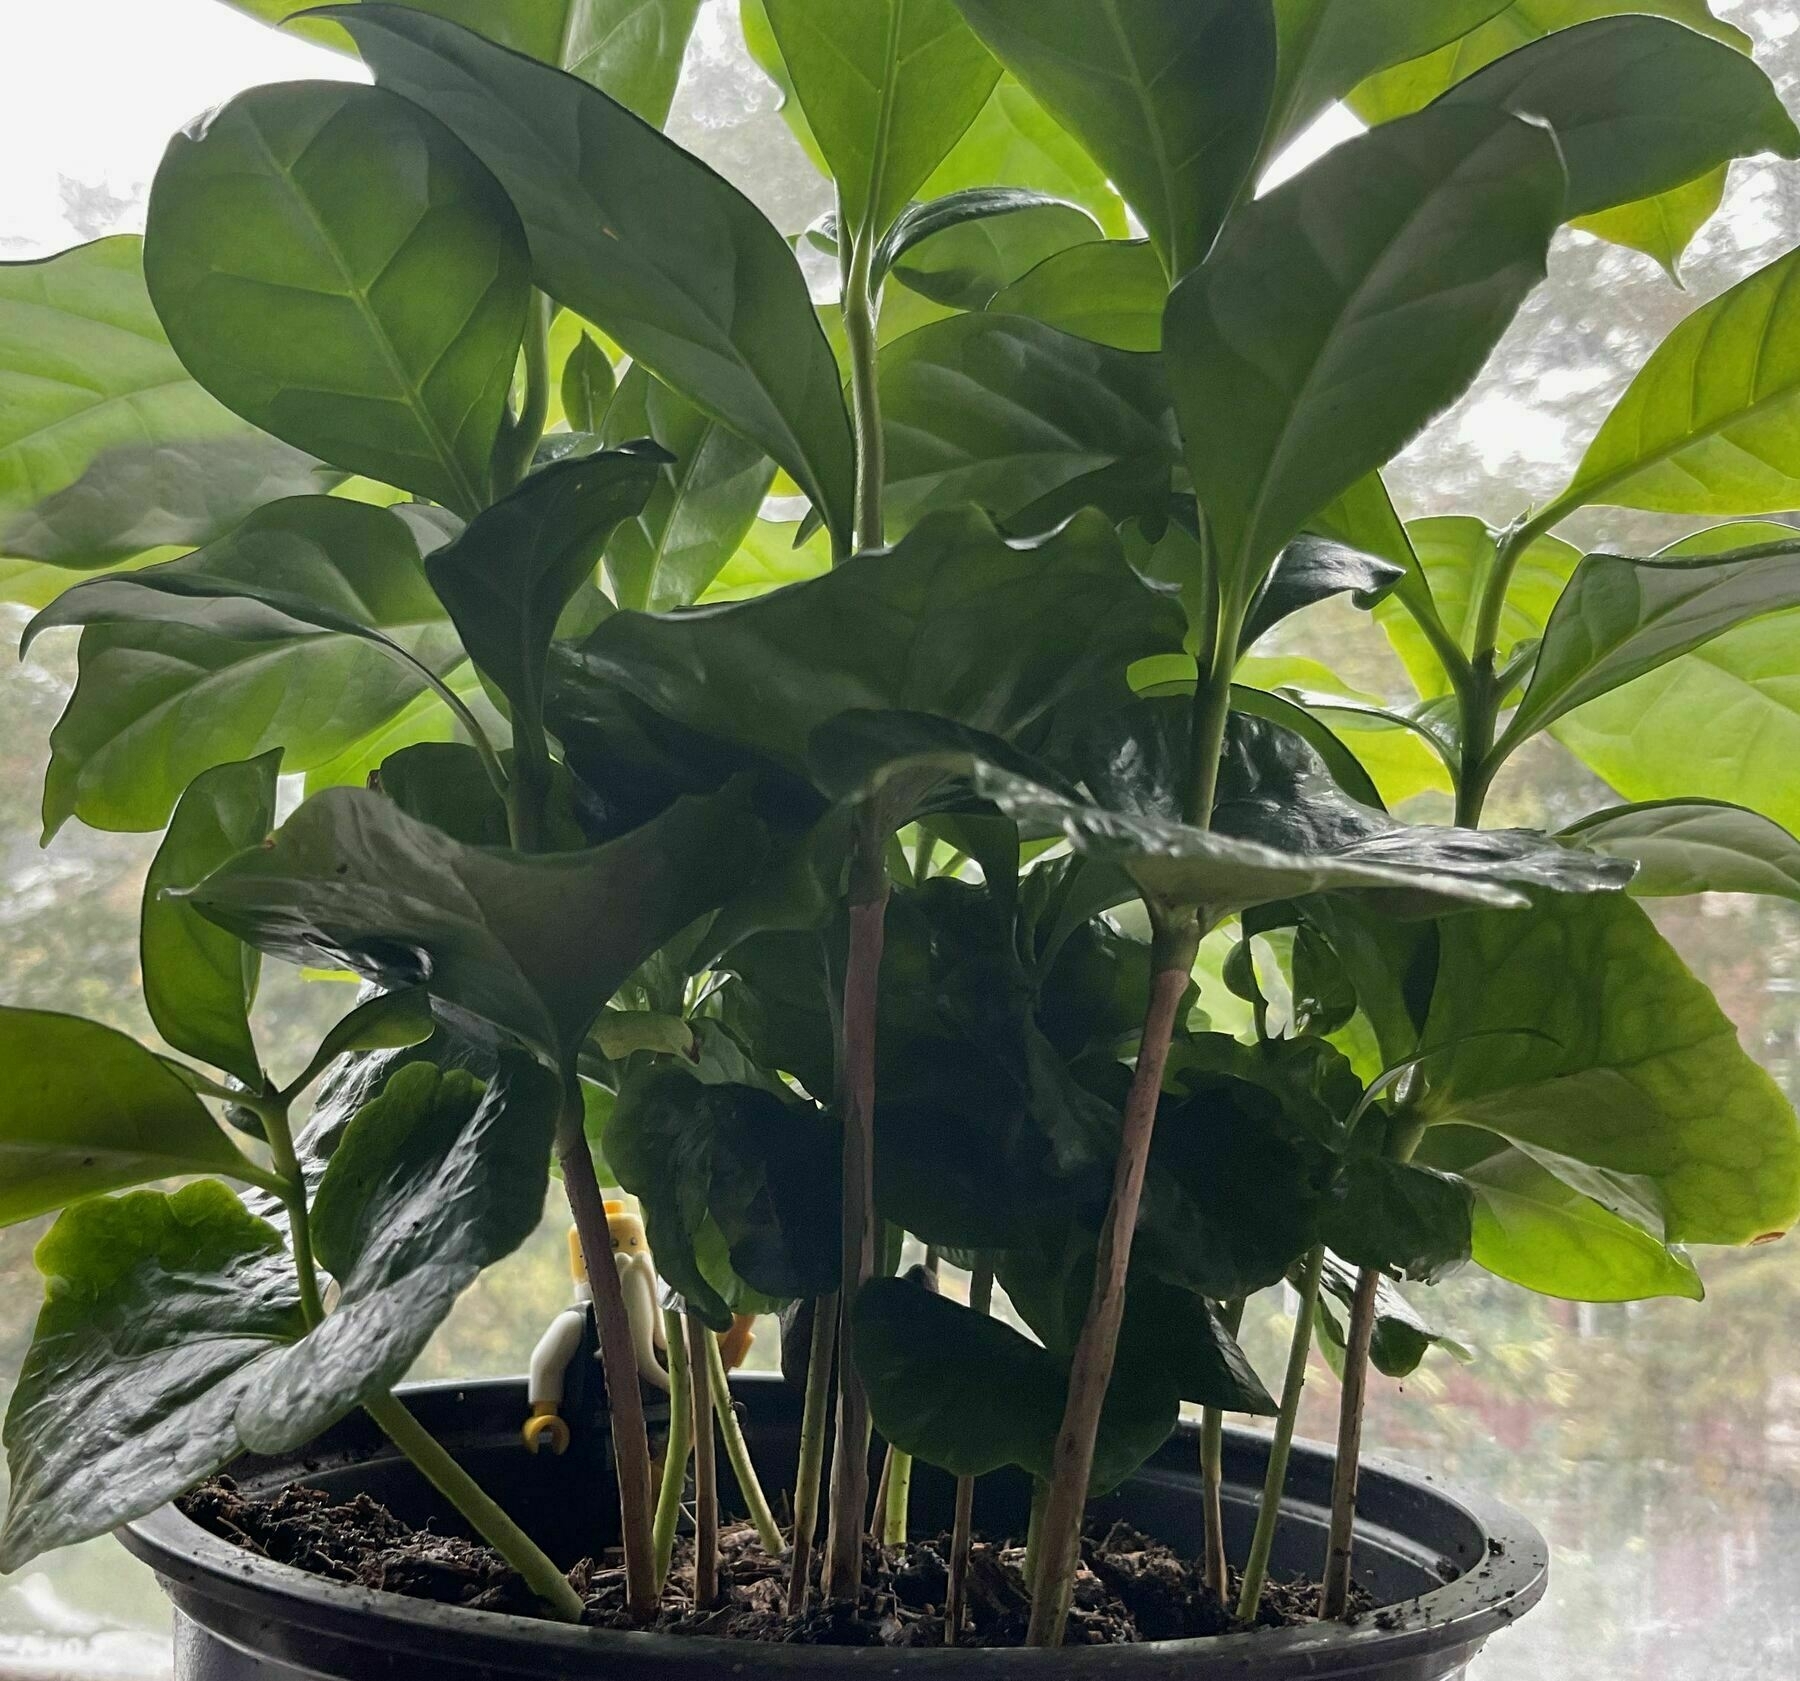 A leafy coffee plant in a pot